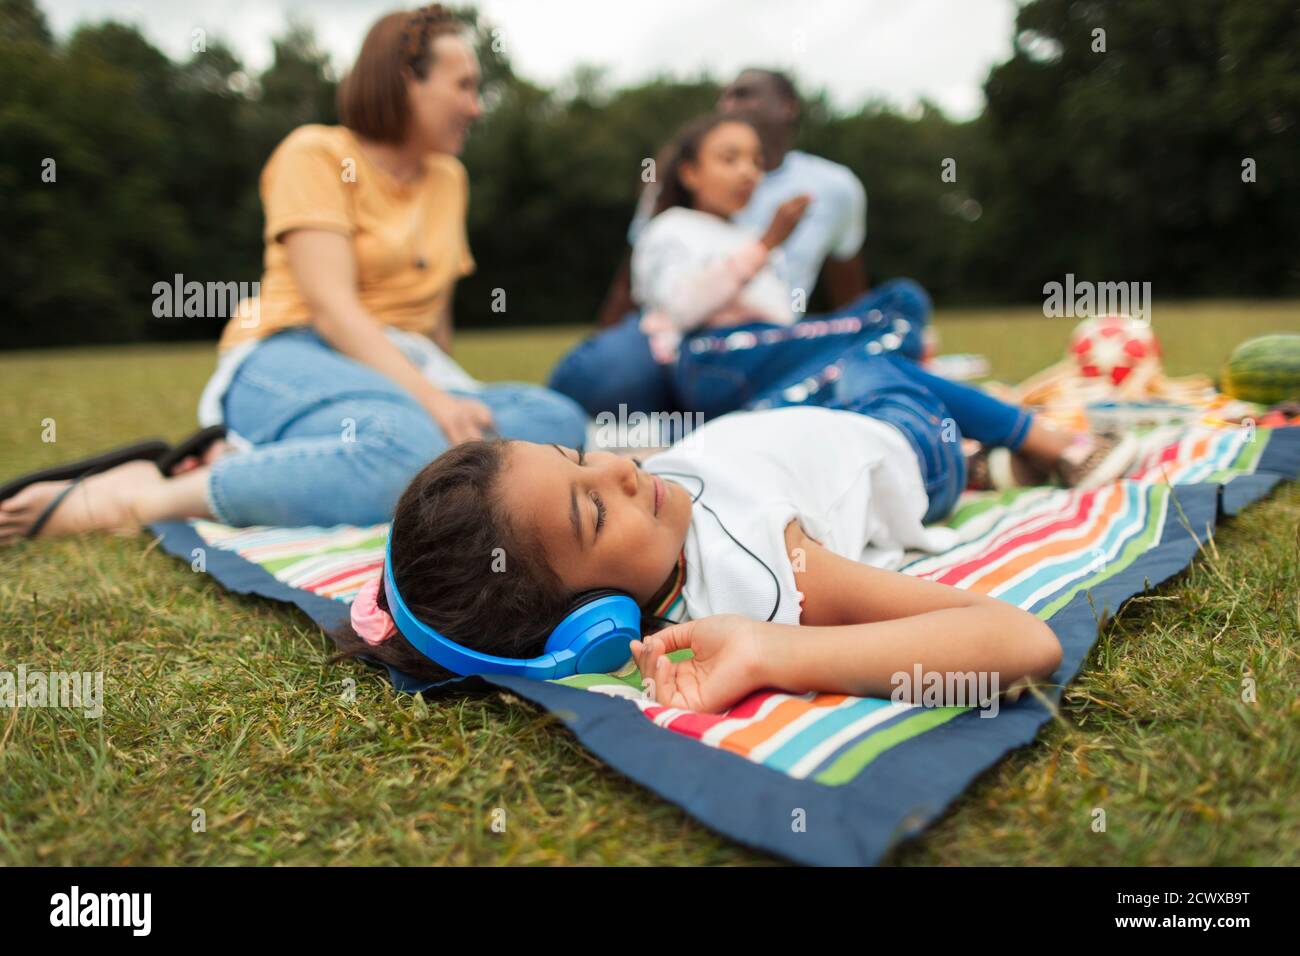 Girl with headphones relaxing and listening to music on picnic blanket Stock Photo